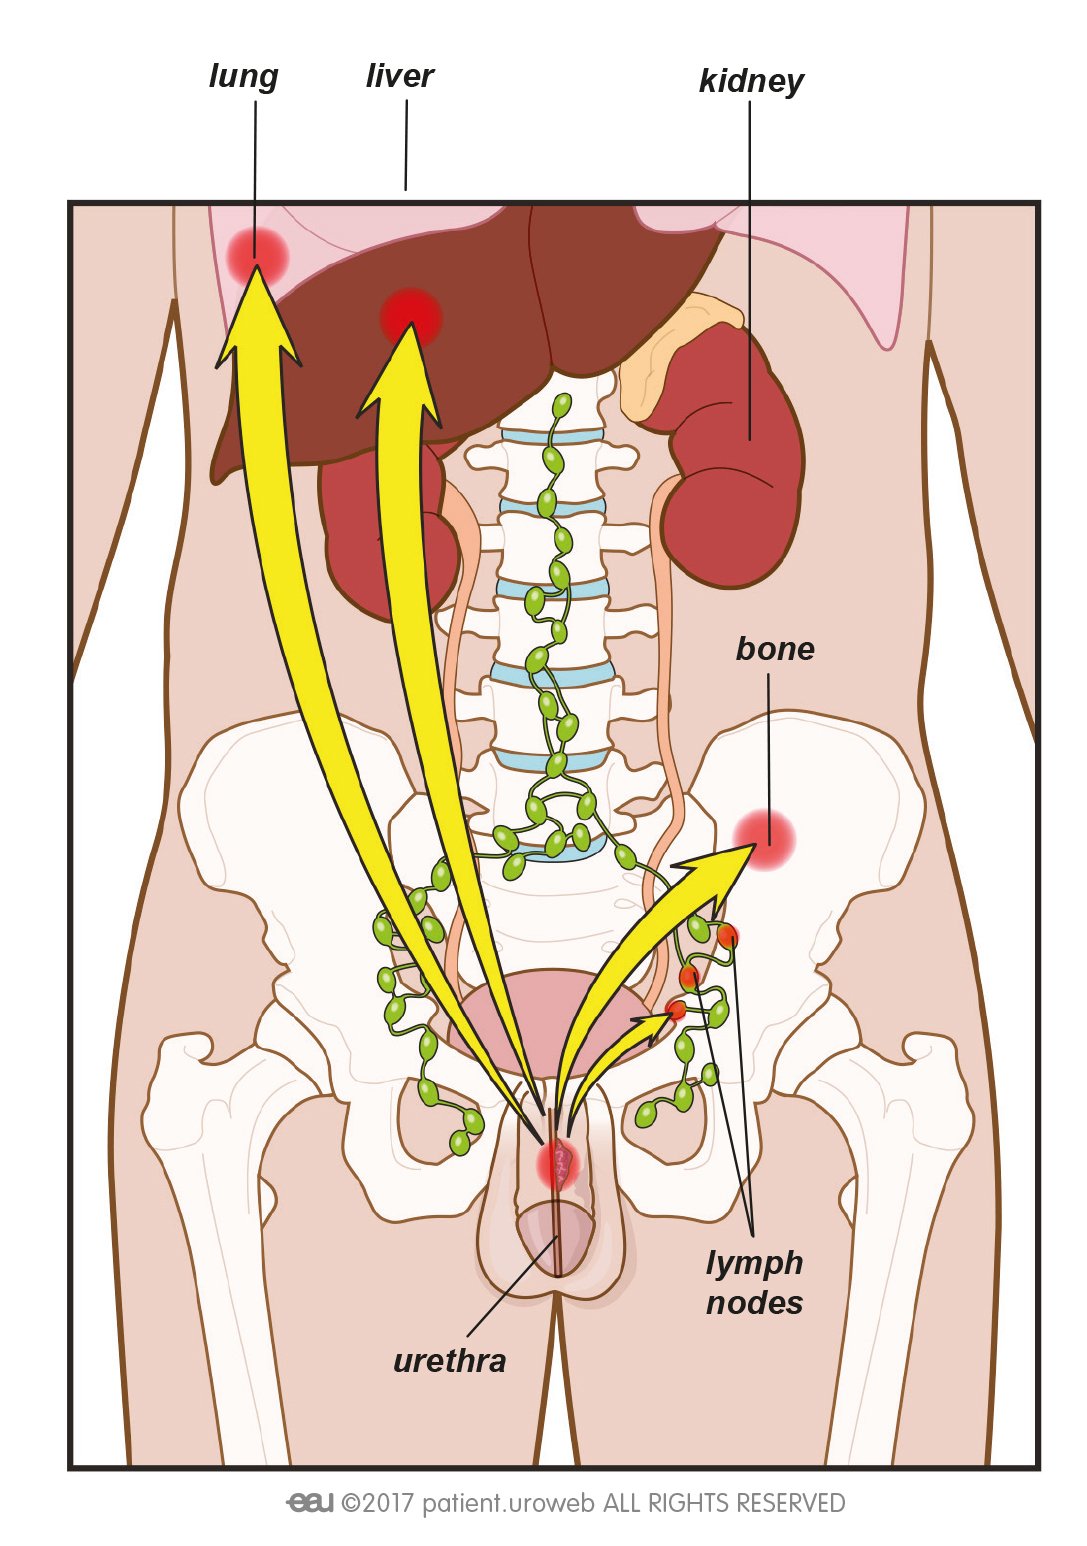 Treatment of primary urethral cancer